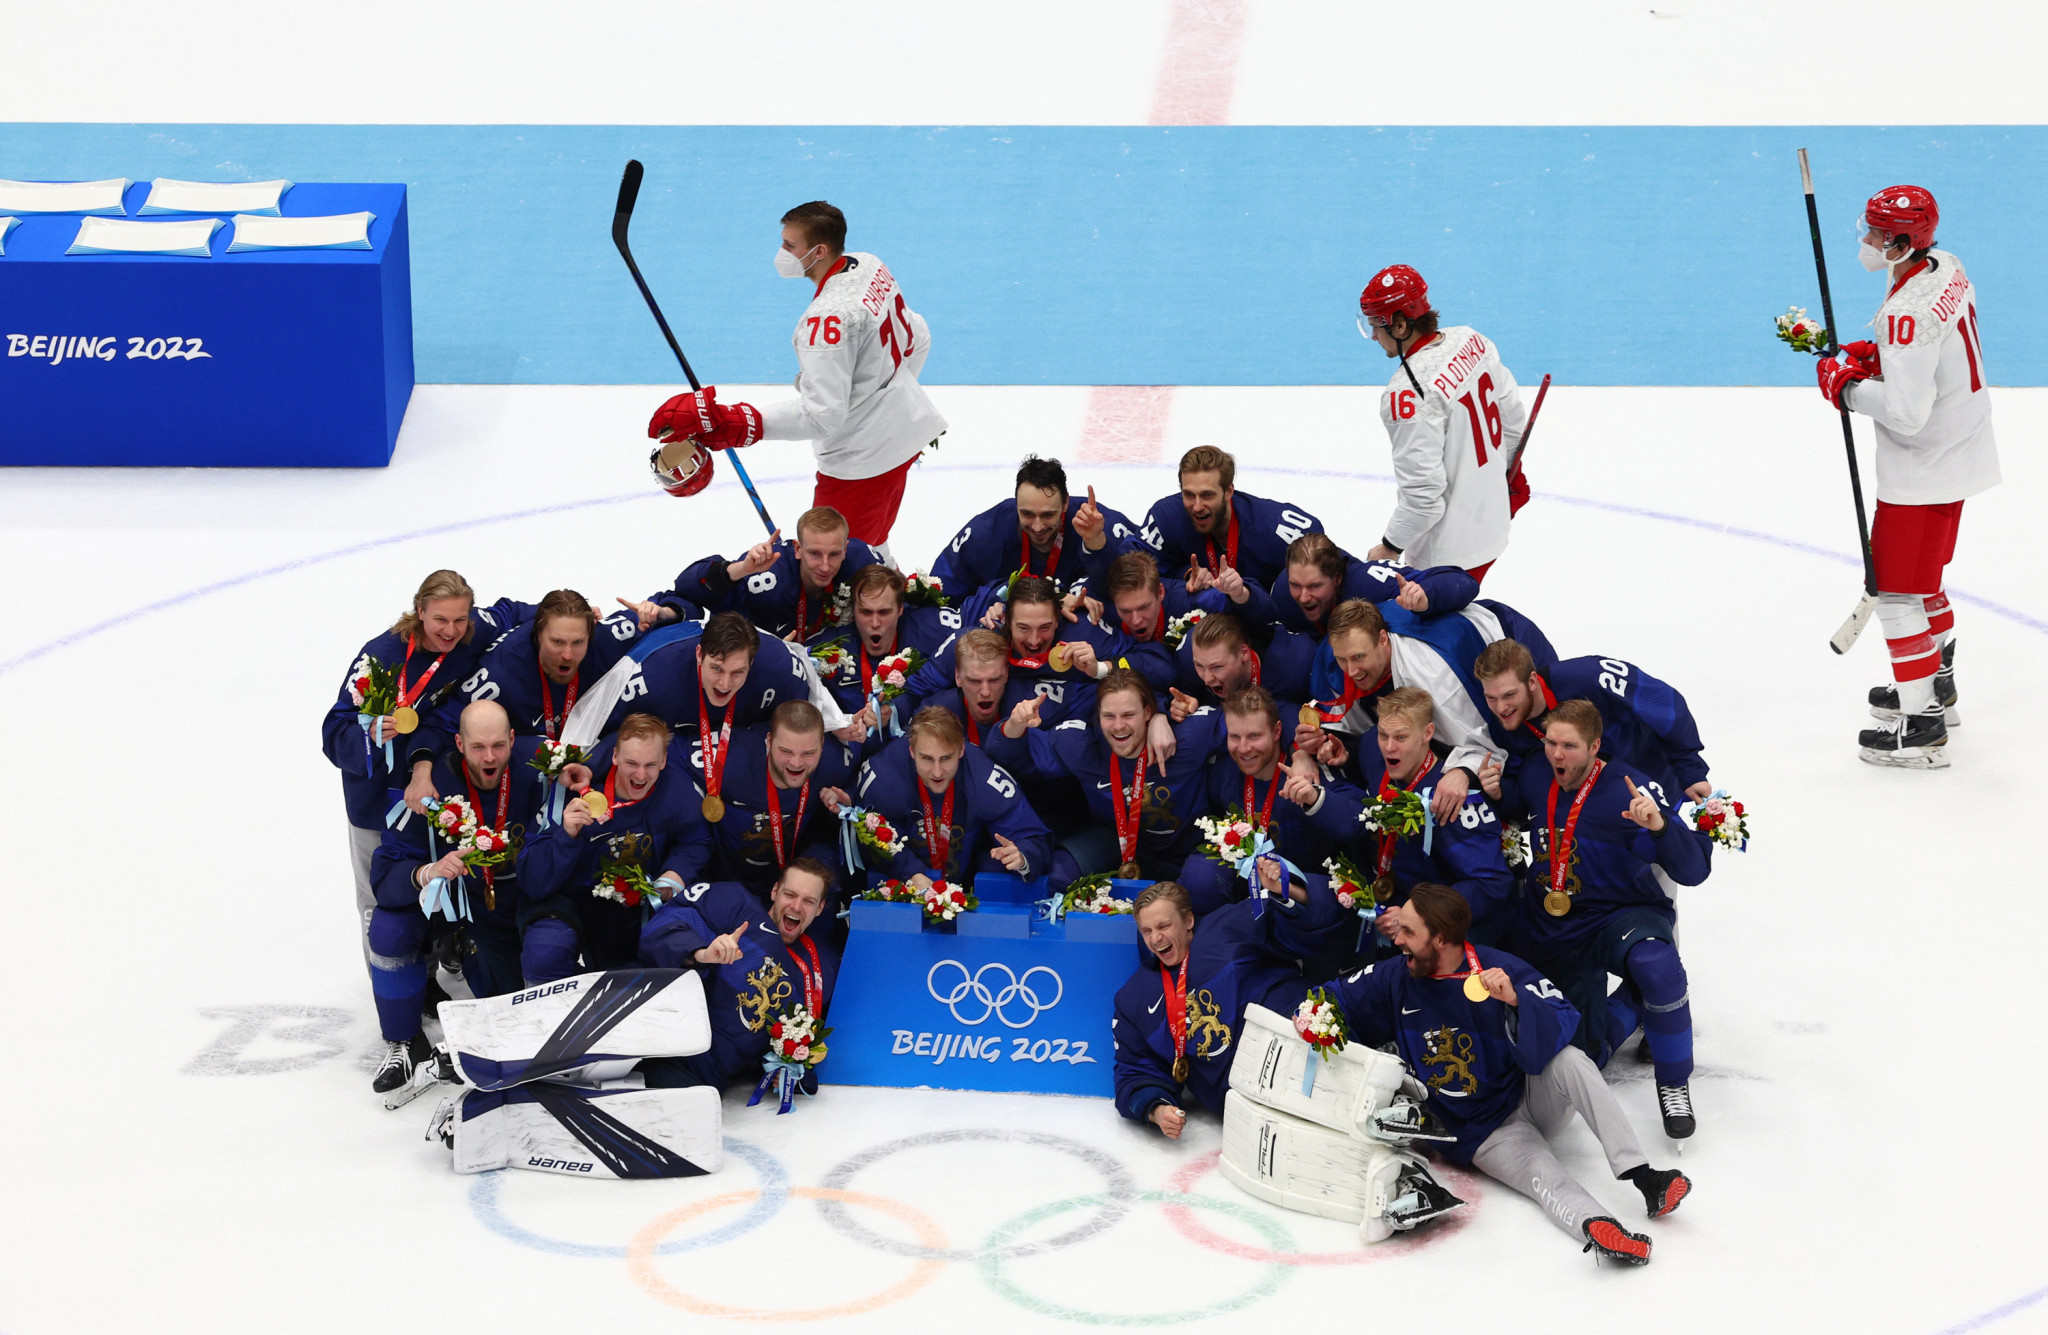 The Finnish Ice Hockey Association said it was unaware of any inappropriate behavior towards players during the Beijing 2022 Winter Olympics, but did not want to downplay the allegation ©Getty Images